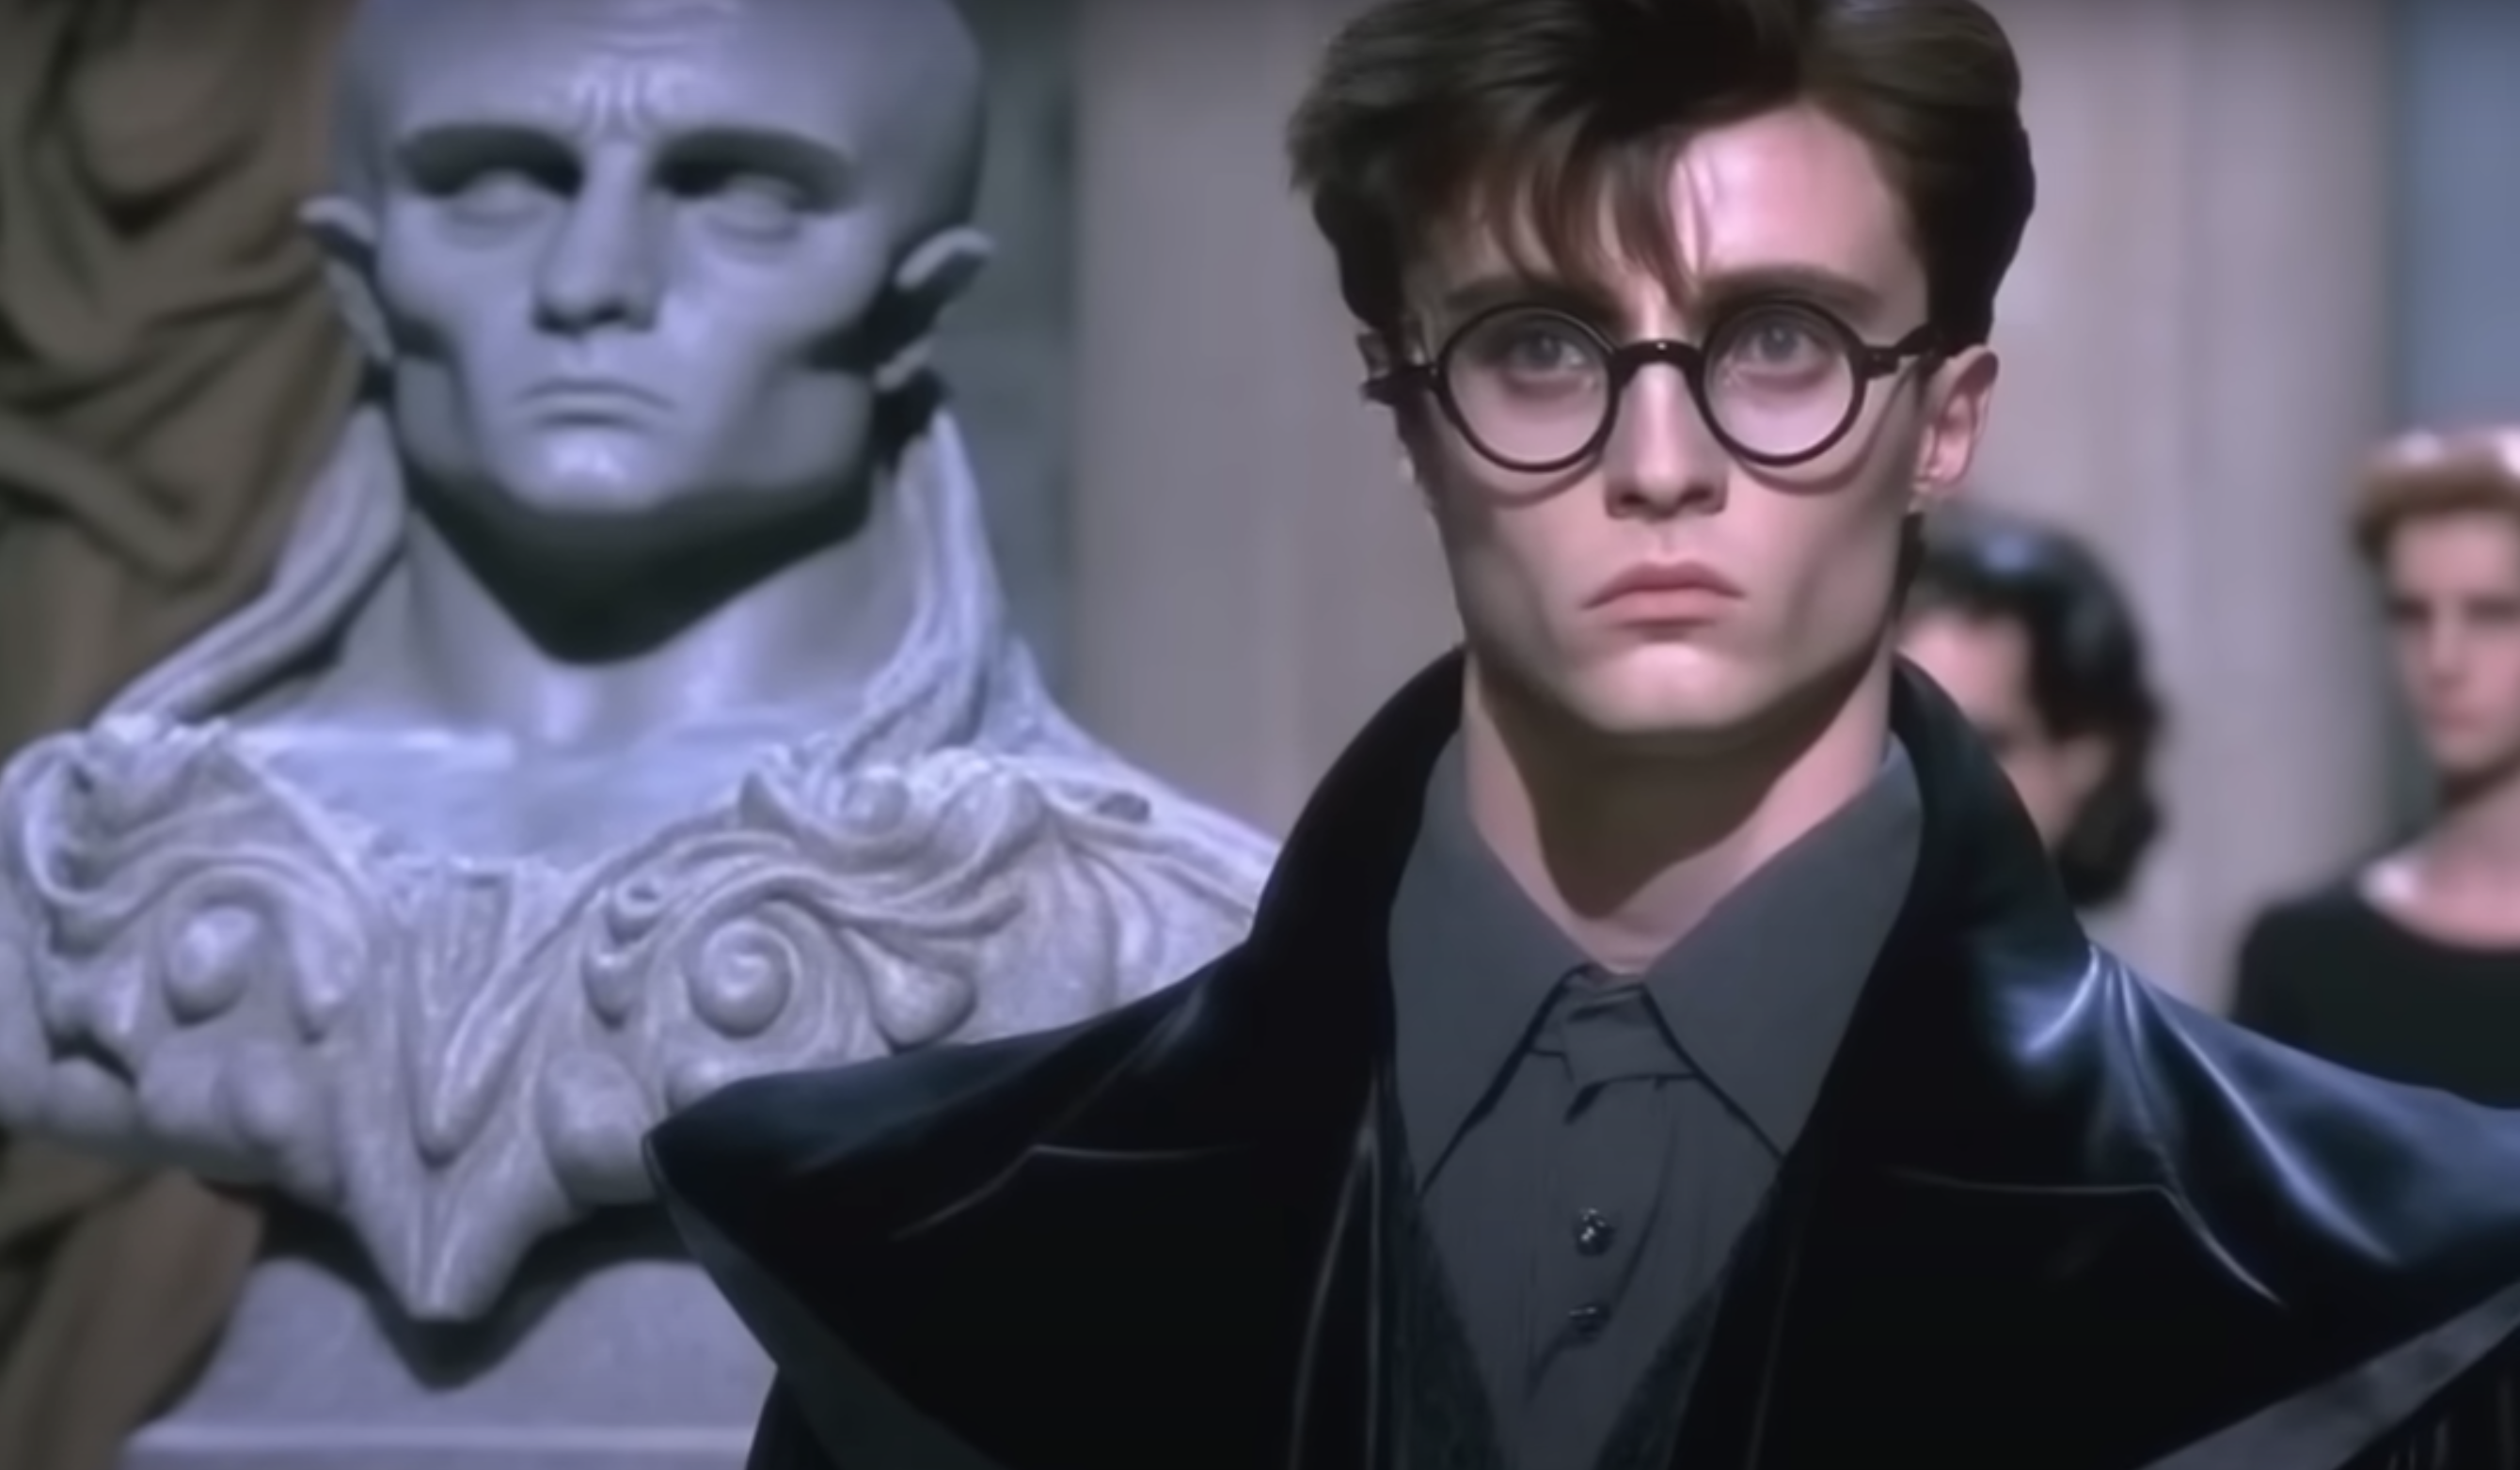 Harry Potter by Balenciaga: AI-generated future of entertainment?